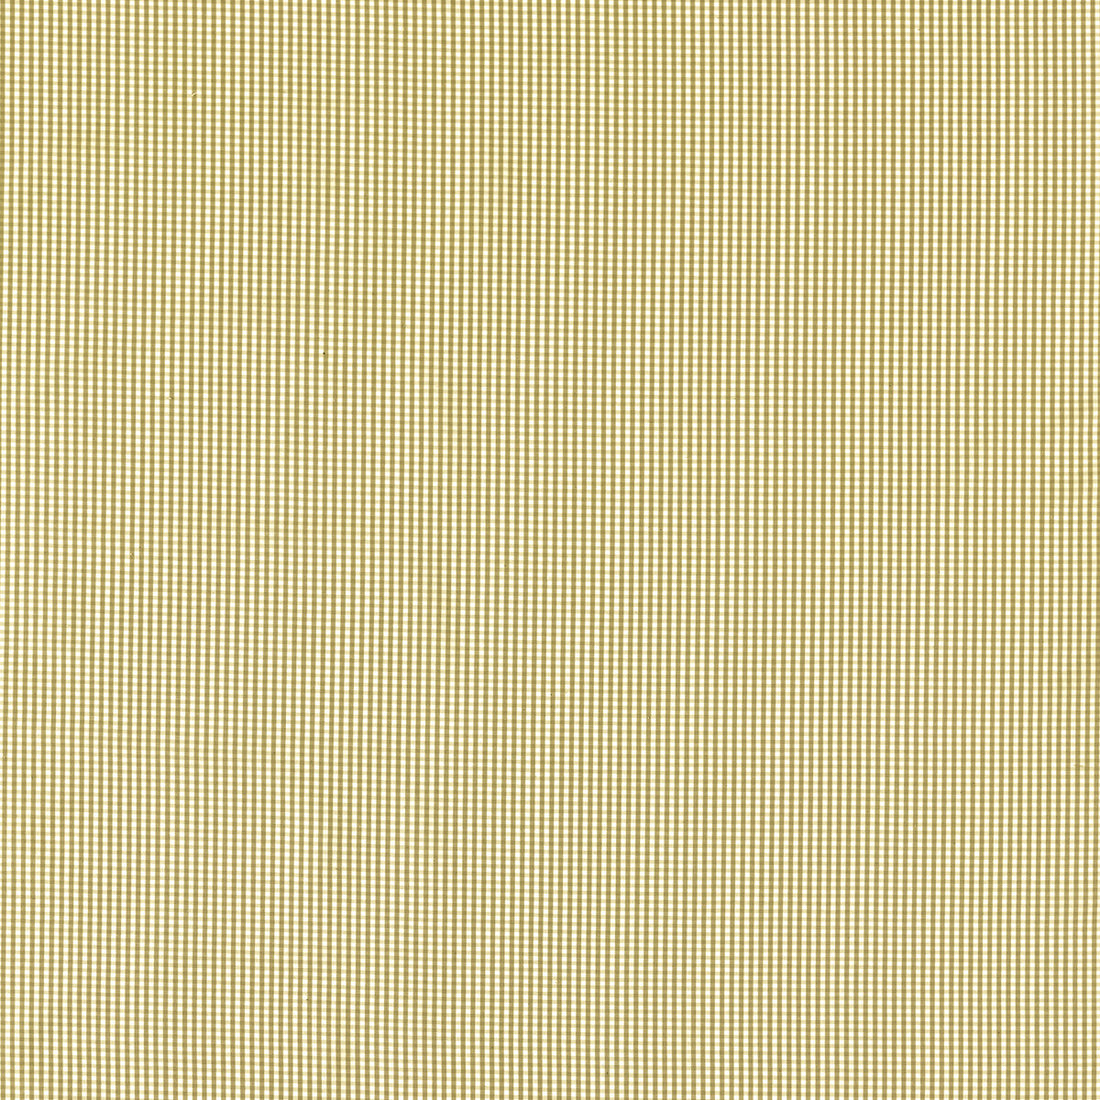 Windsor fabric in ochre color - pattern F1505/07.CAC.0 - by Clarke And Clarke in the Clarke &amp; Clarke Edgeworth collection